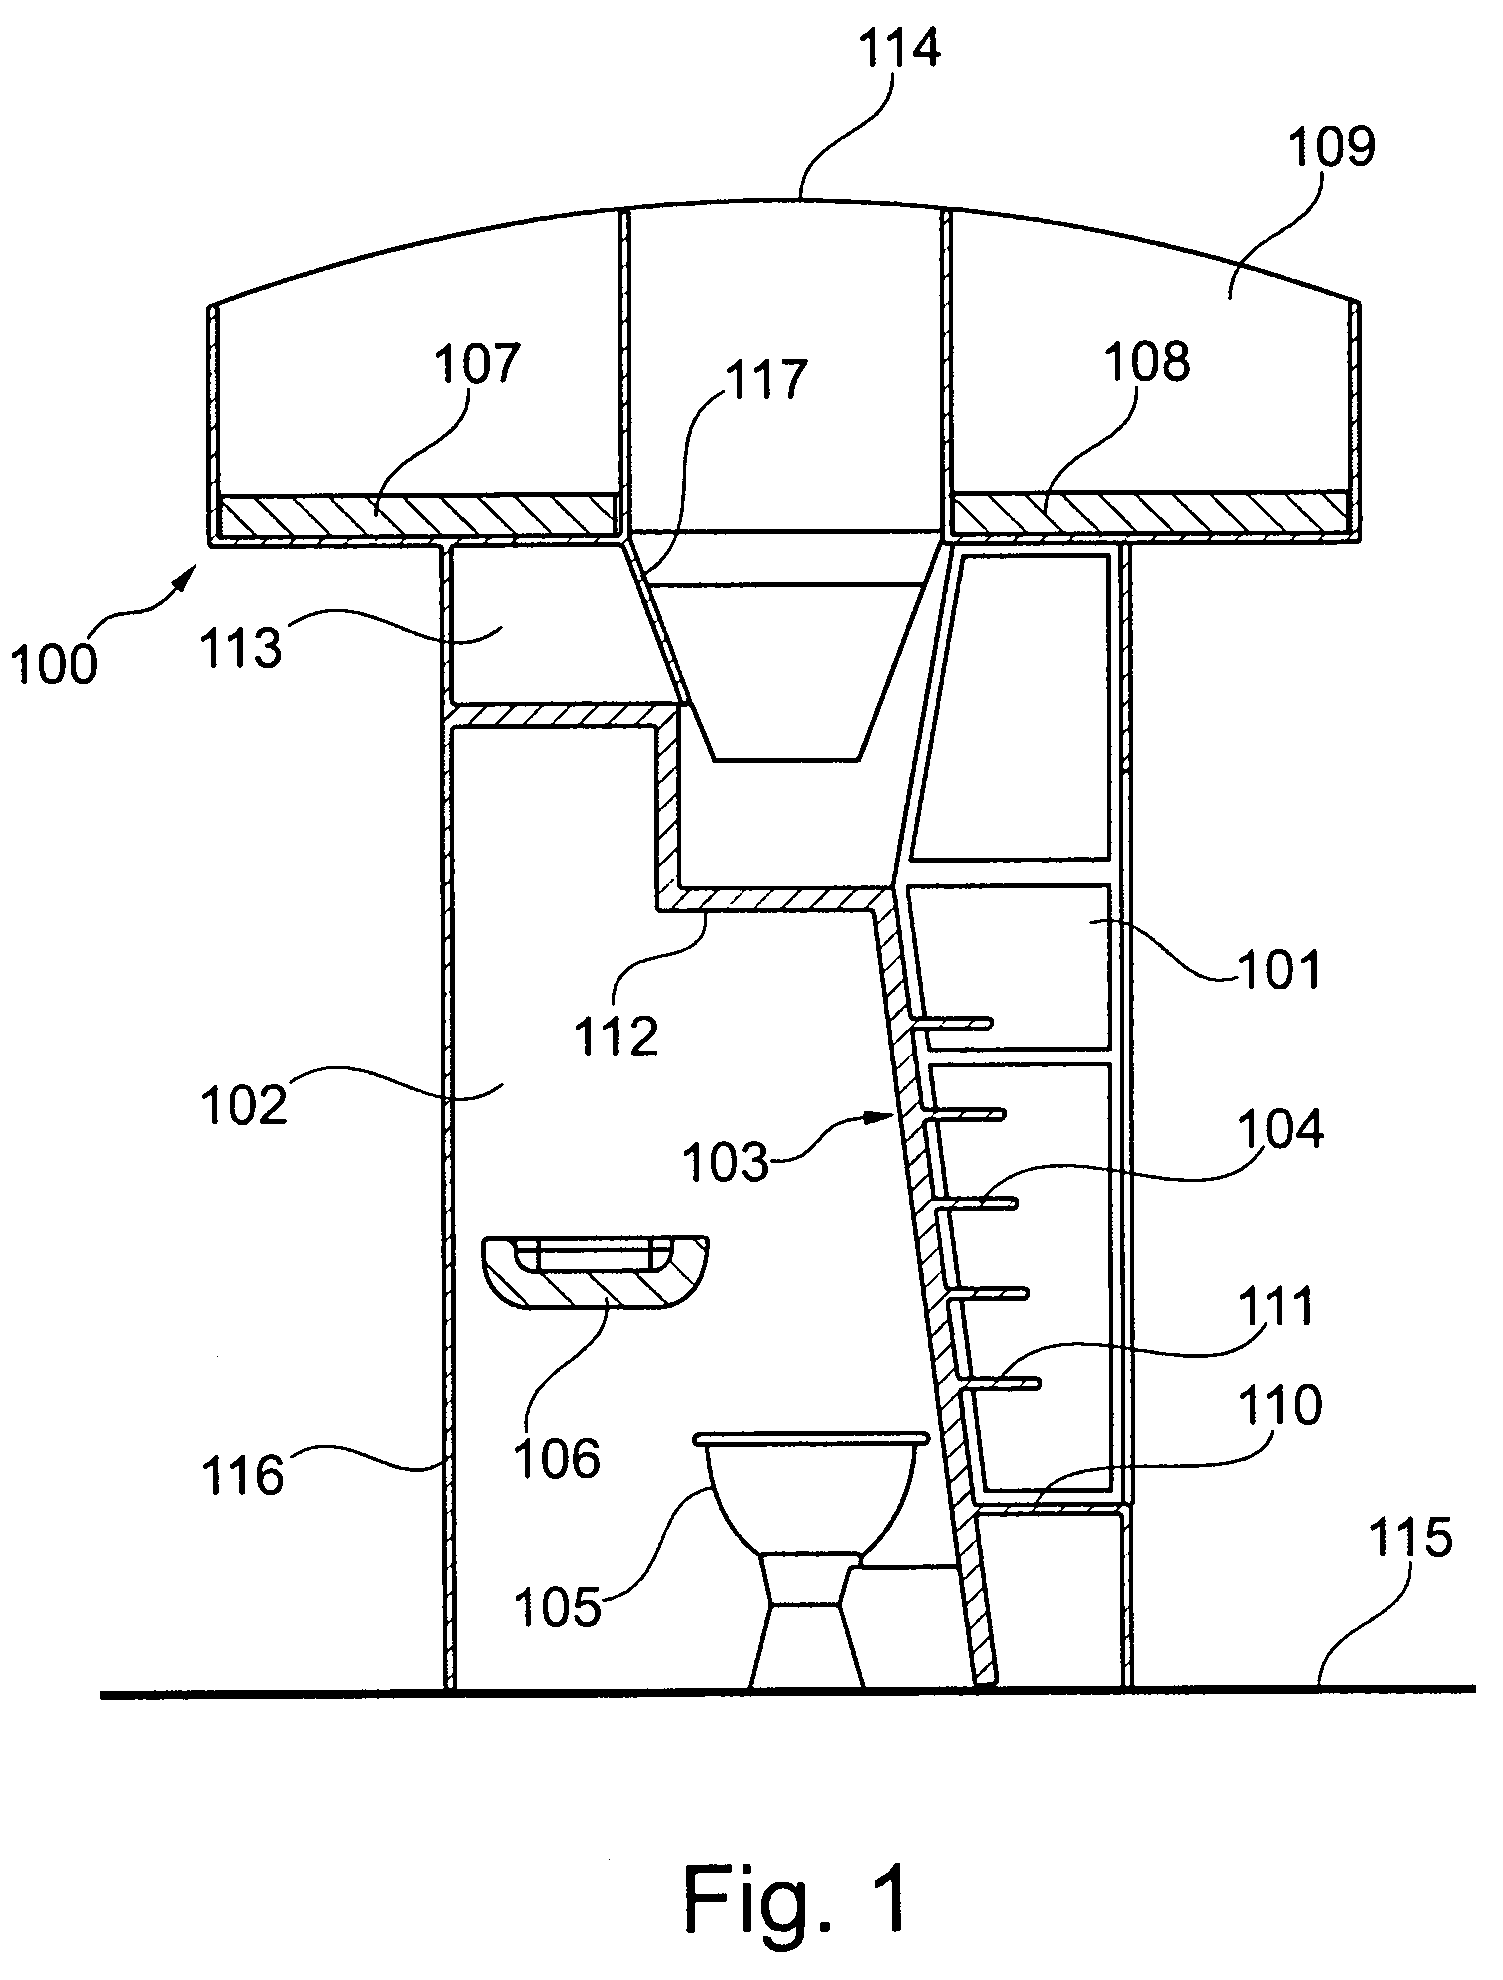 Combined staircase and lavatory module for an aircraft